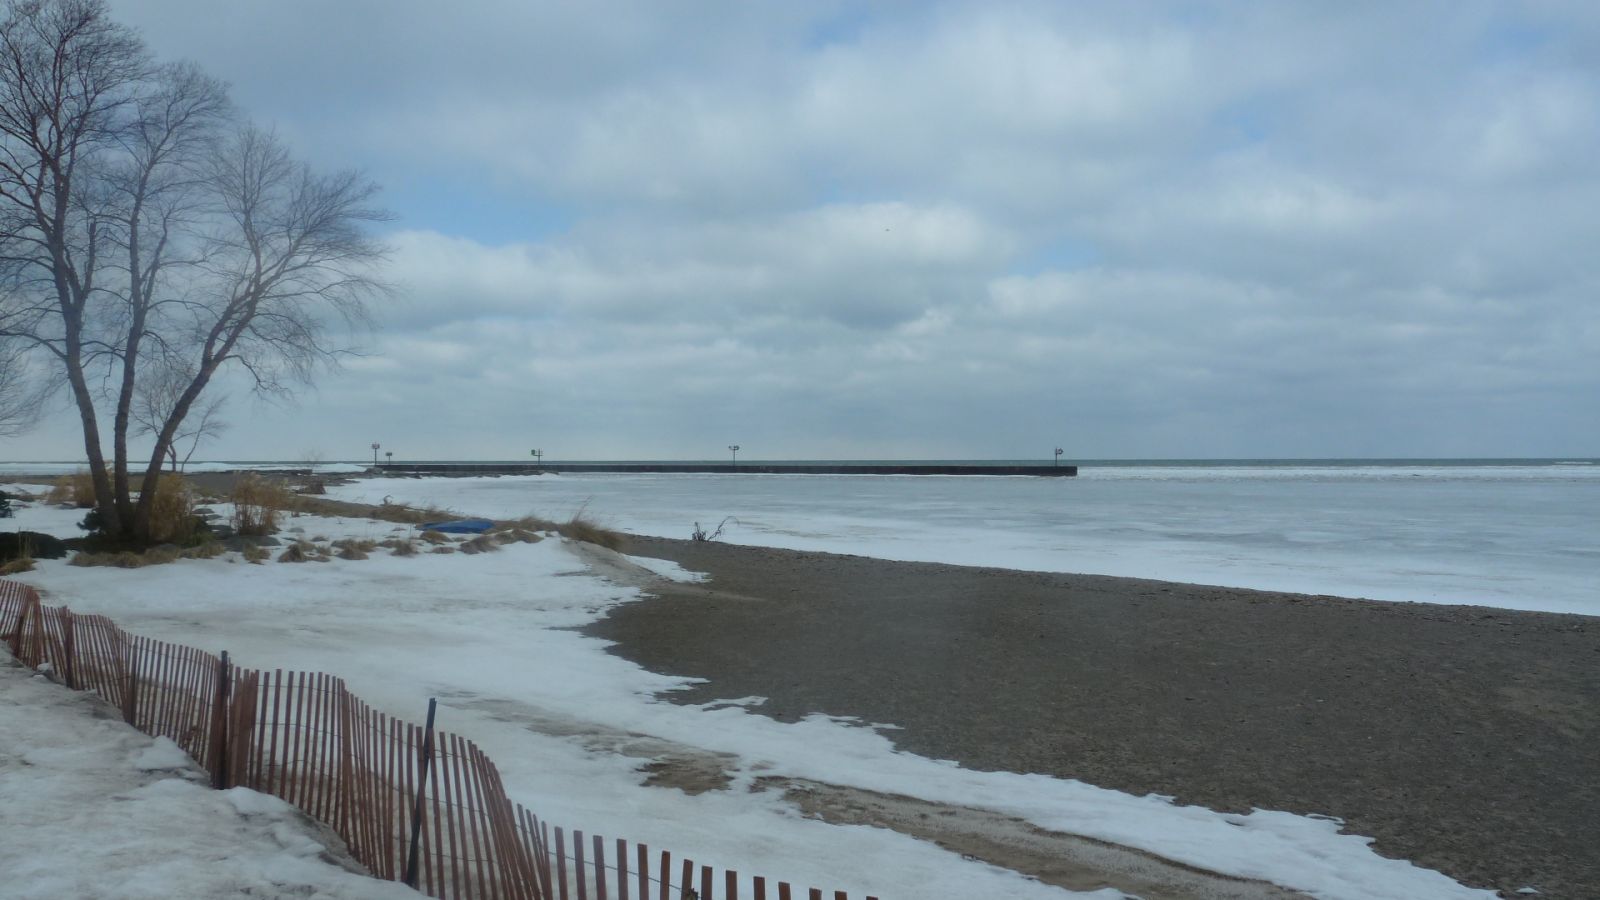 mouth of the Vermilion River clogged by ice on Lake Erie